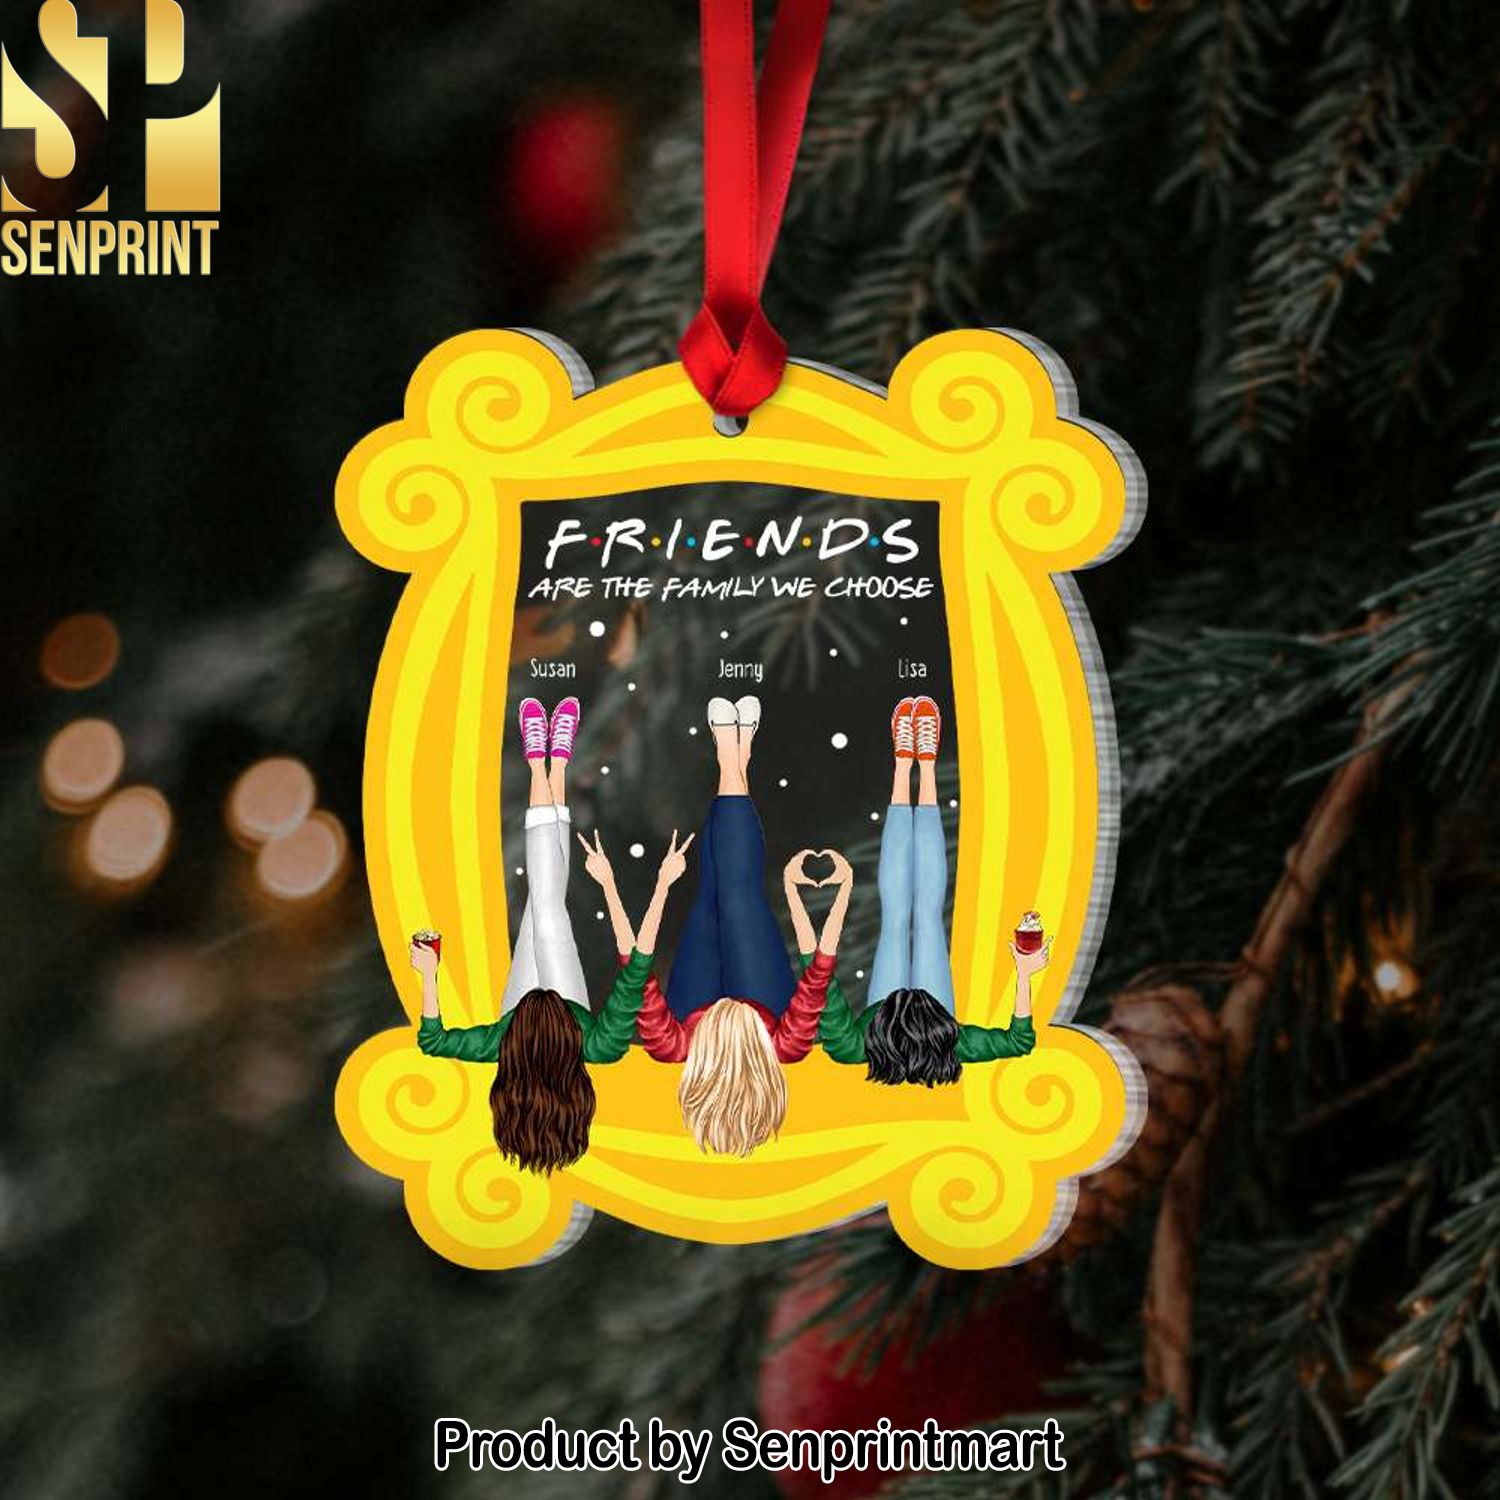 Friends Are The Family We Choose, Gift For Friends, Personalized Acrylic Ornament, Drinking Friends Ornament, Christmas Gift